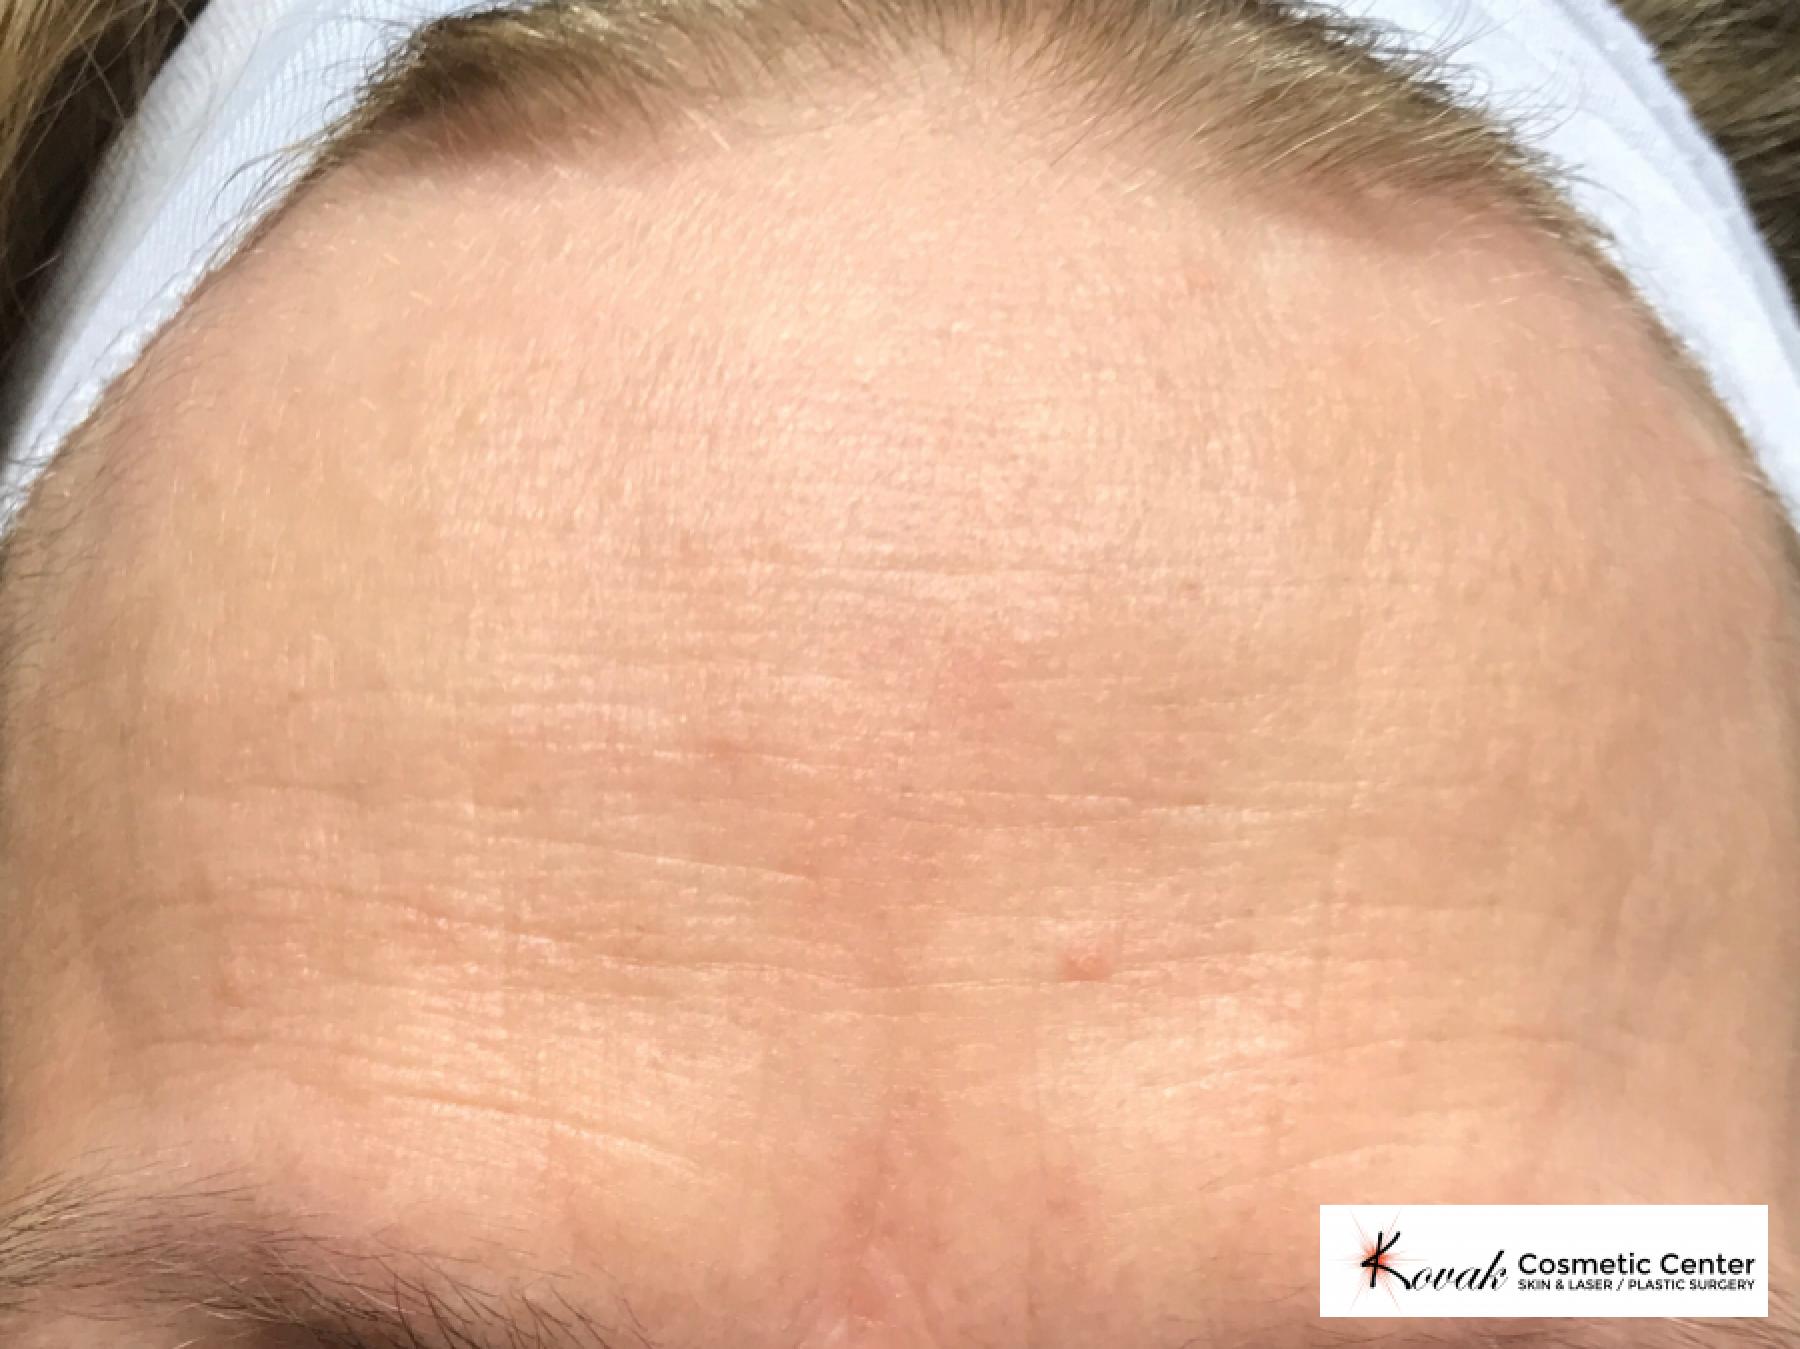 Forehead lines treated with Restylane Silk on 60 year old female - After 1